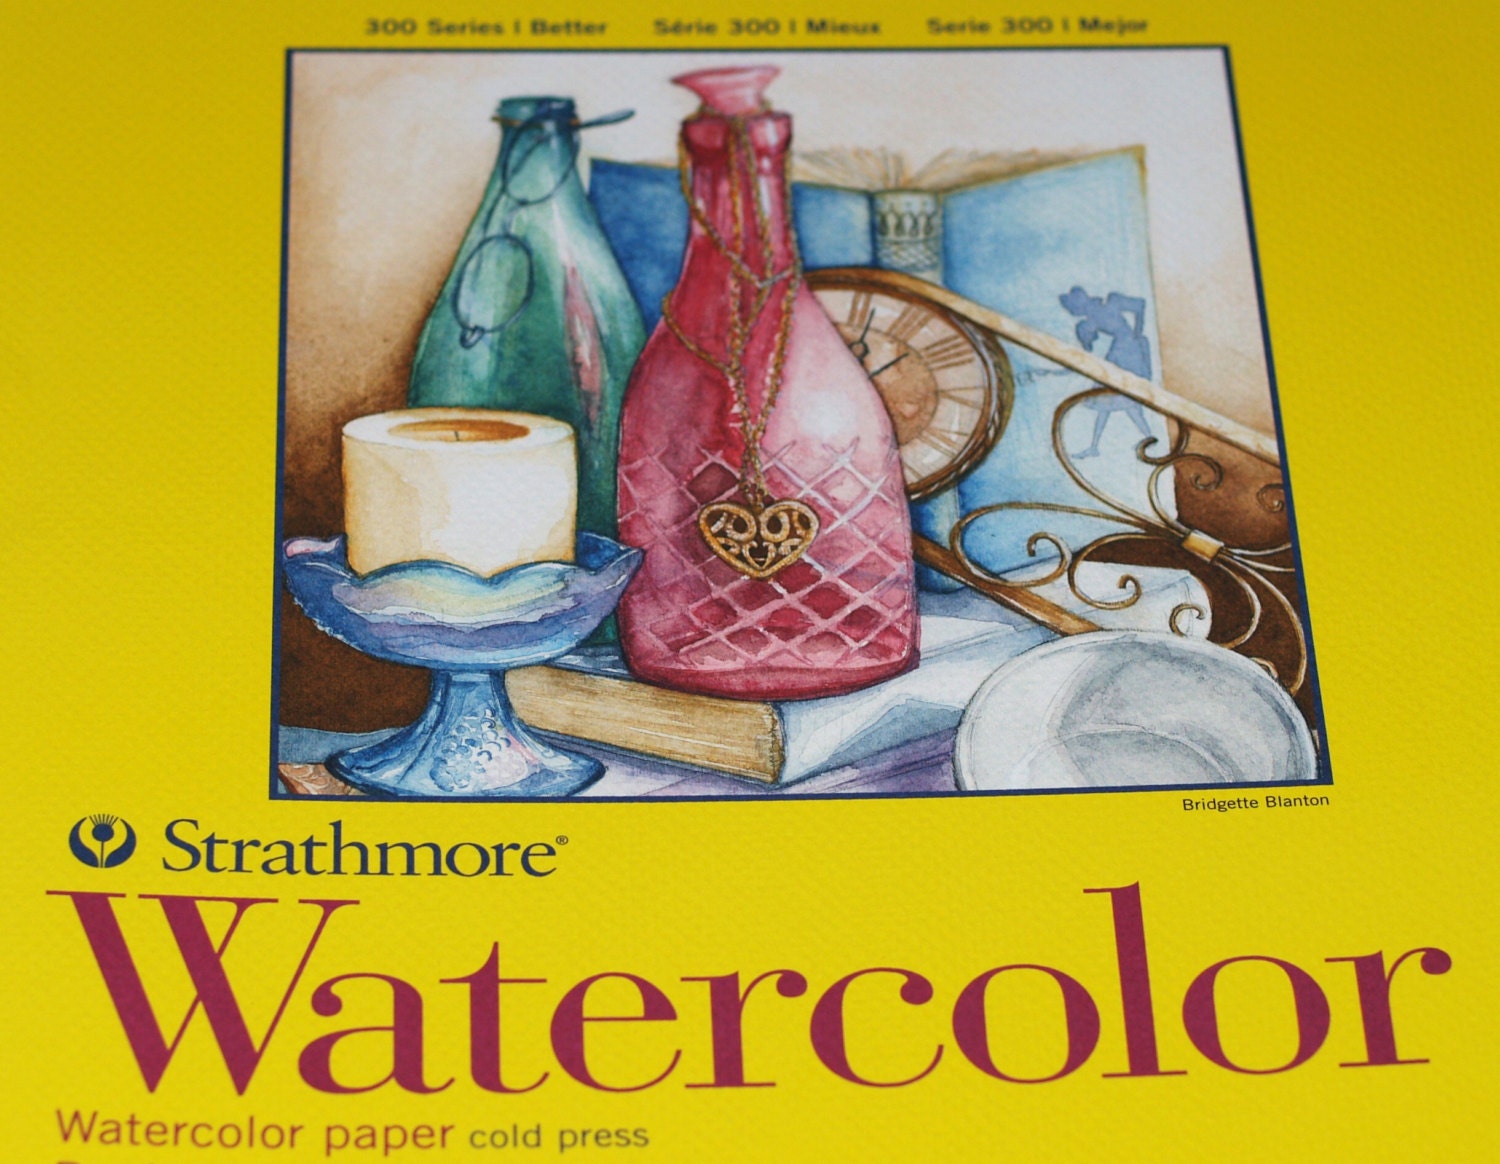 Strathmore Watercolor cards 3x4 cards and envelopes